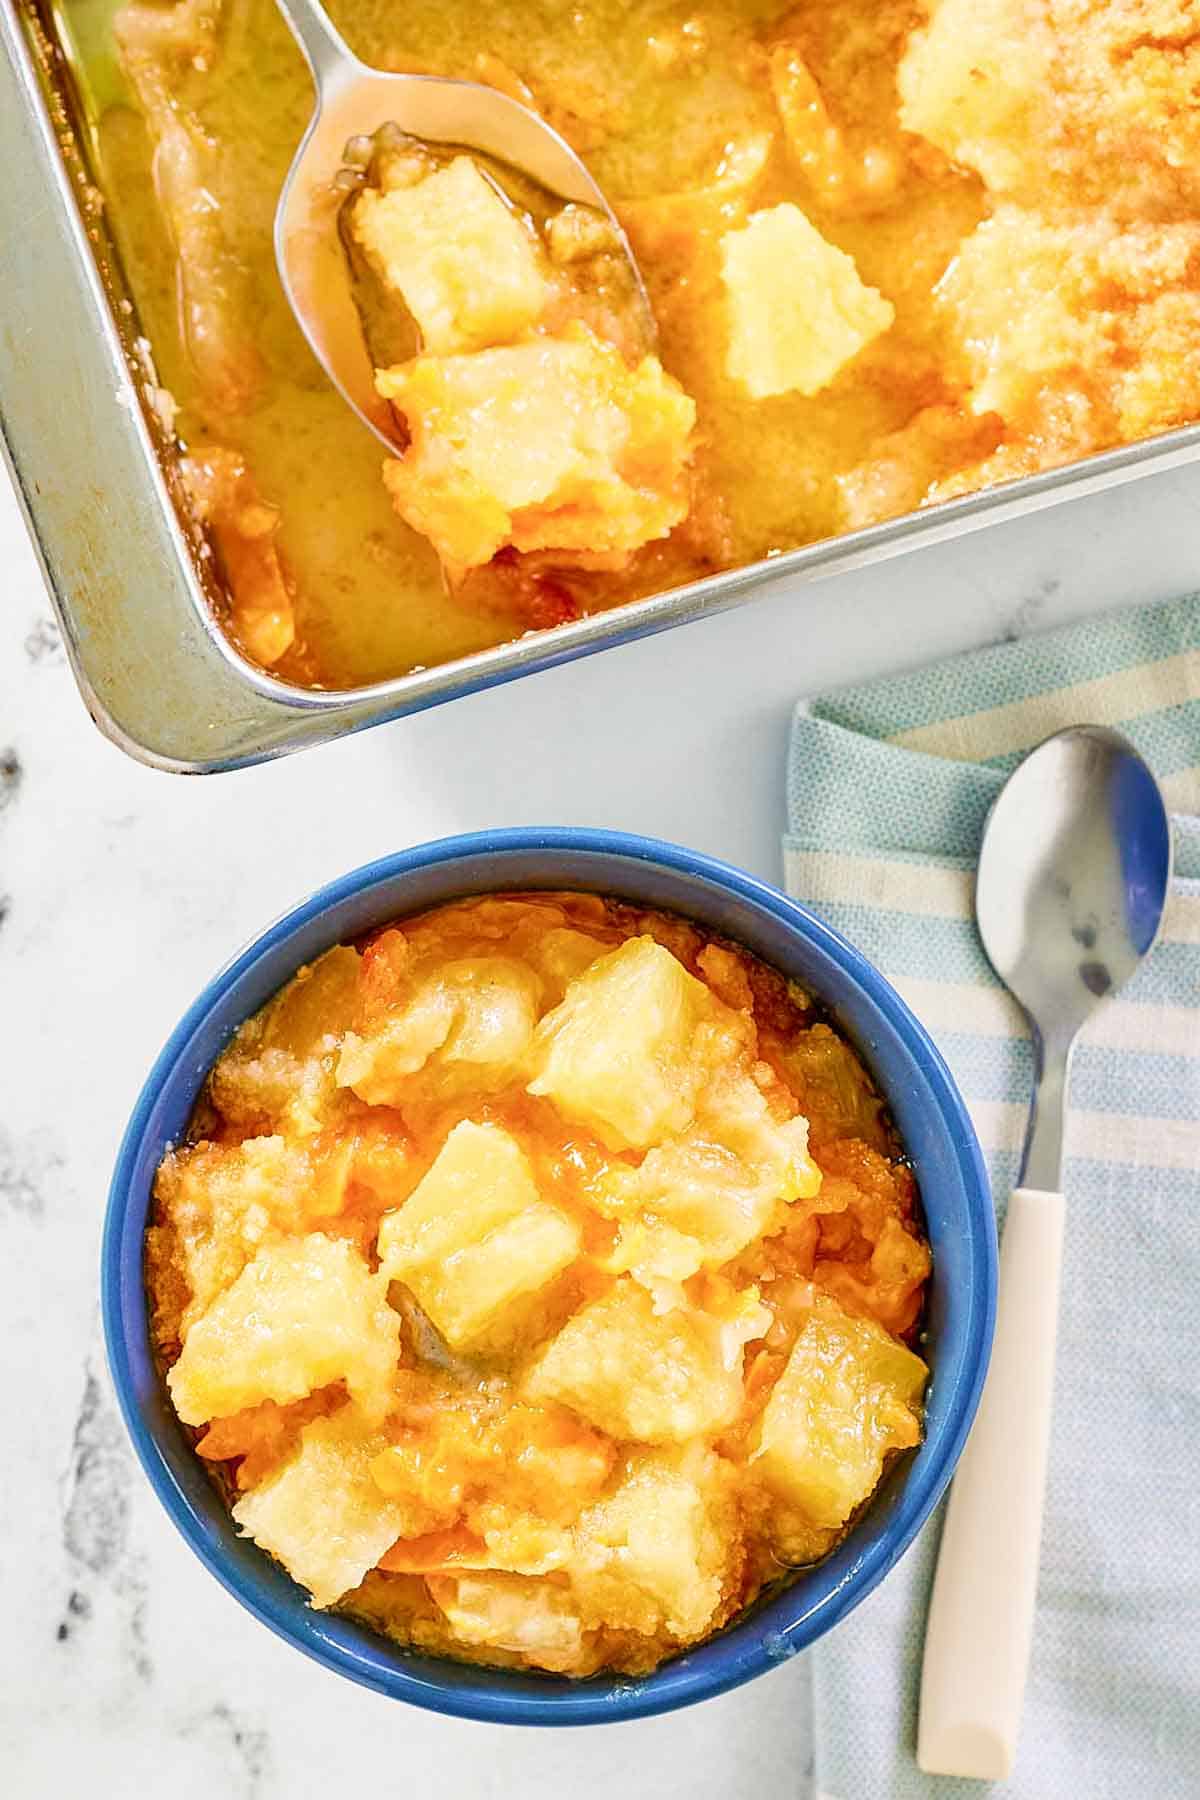 Pineapple cheese casserole in a baking dish and bowl.